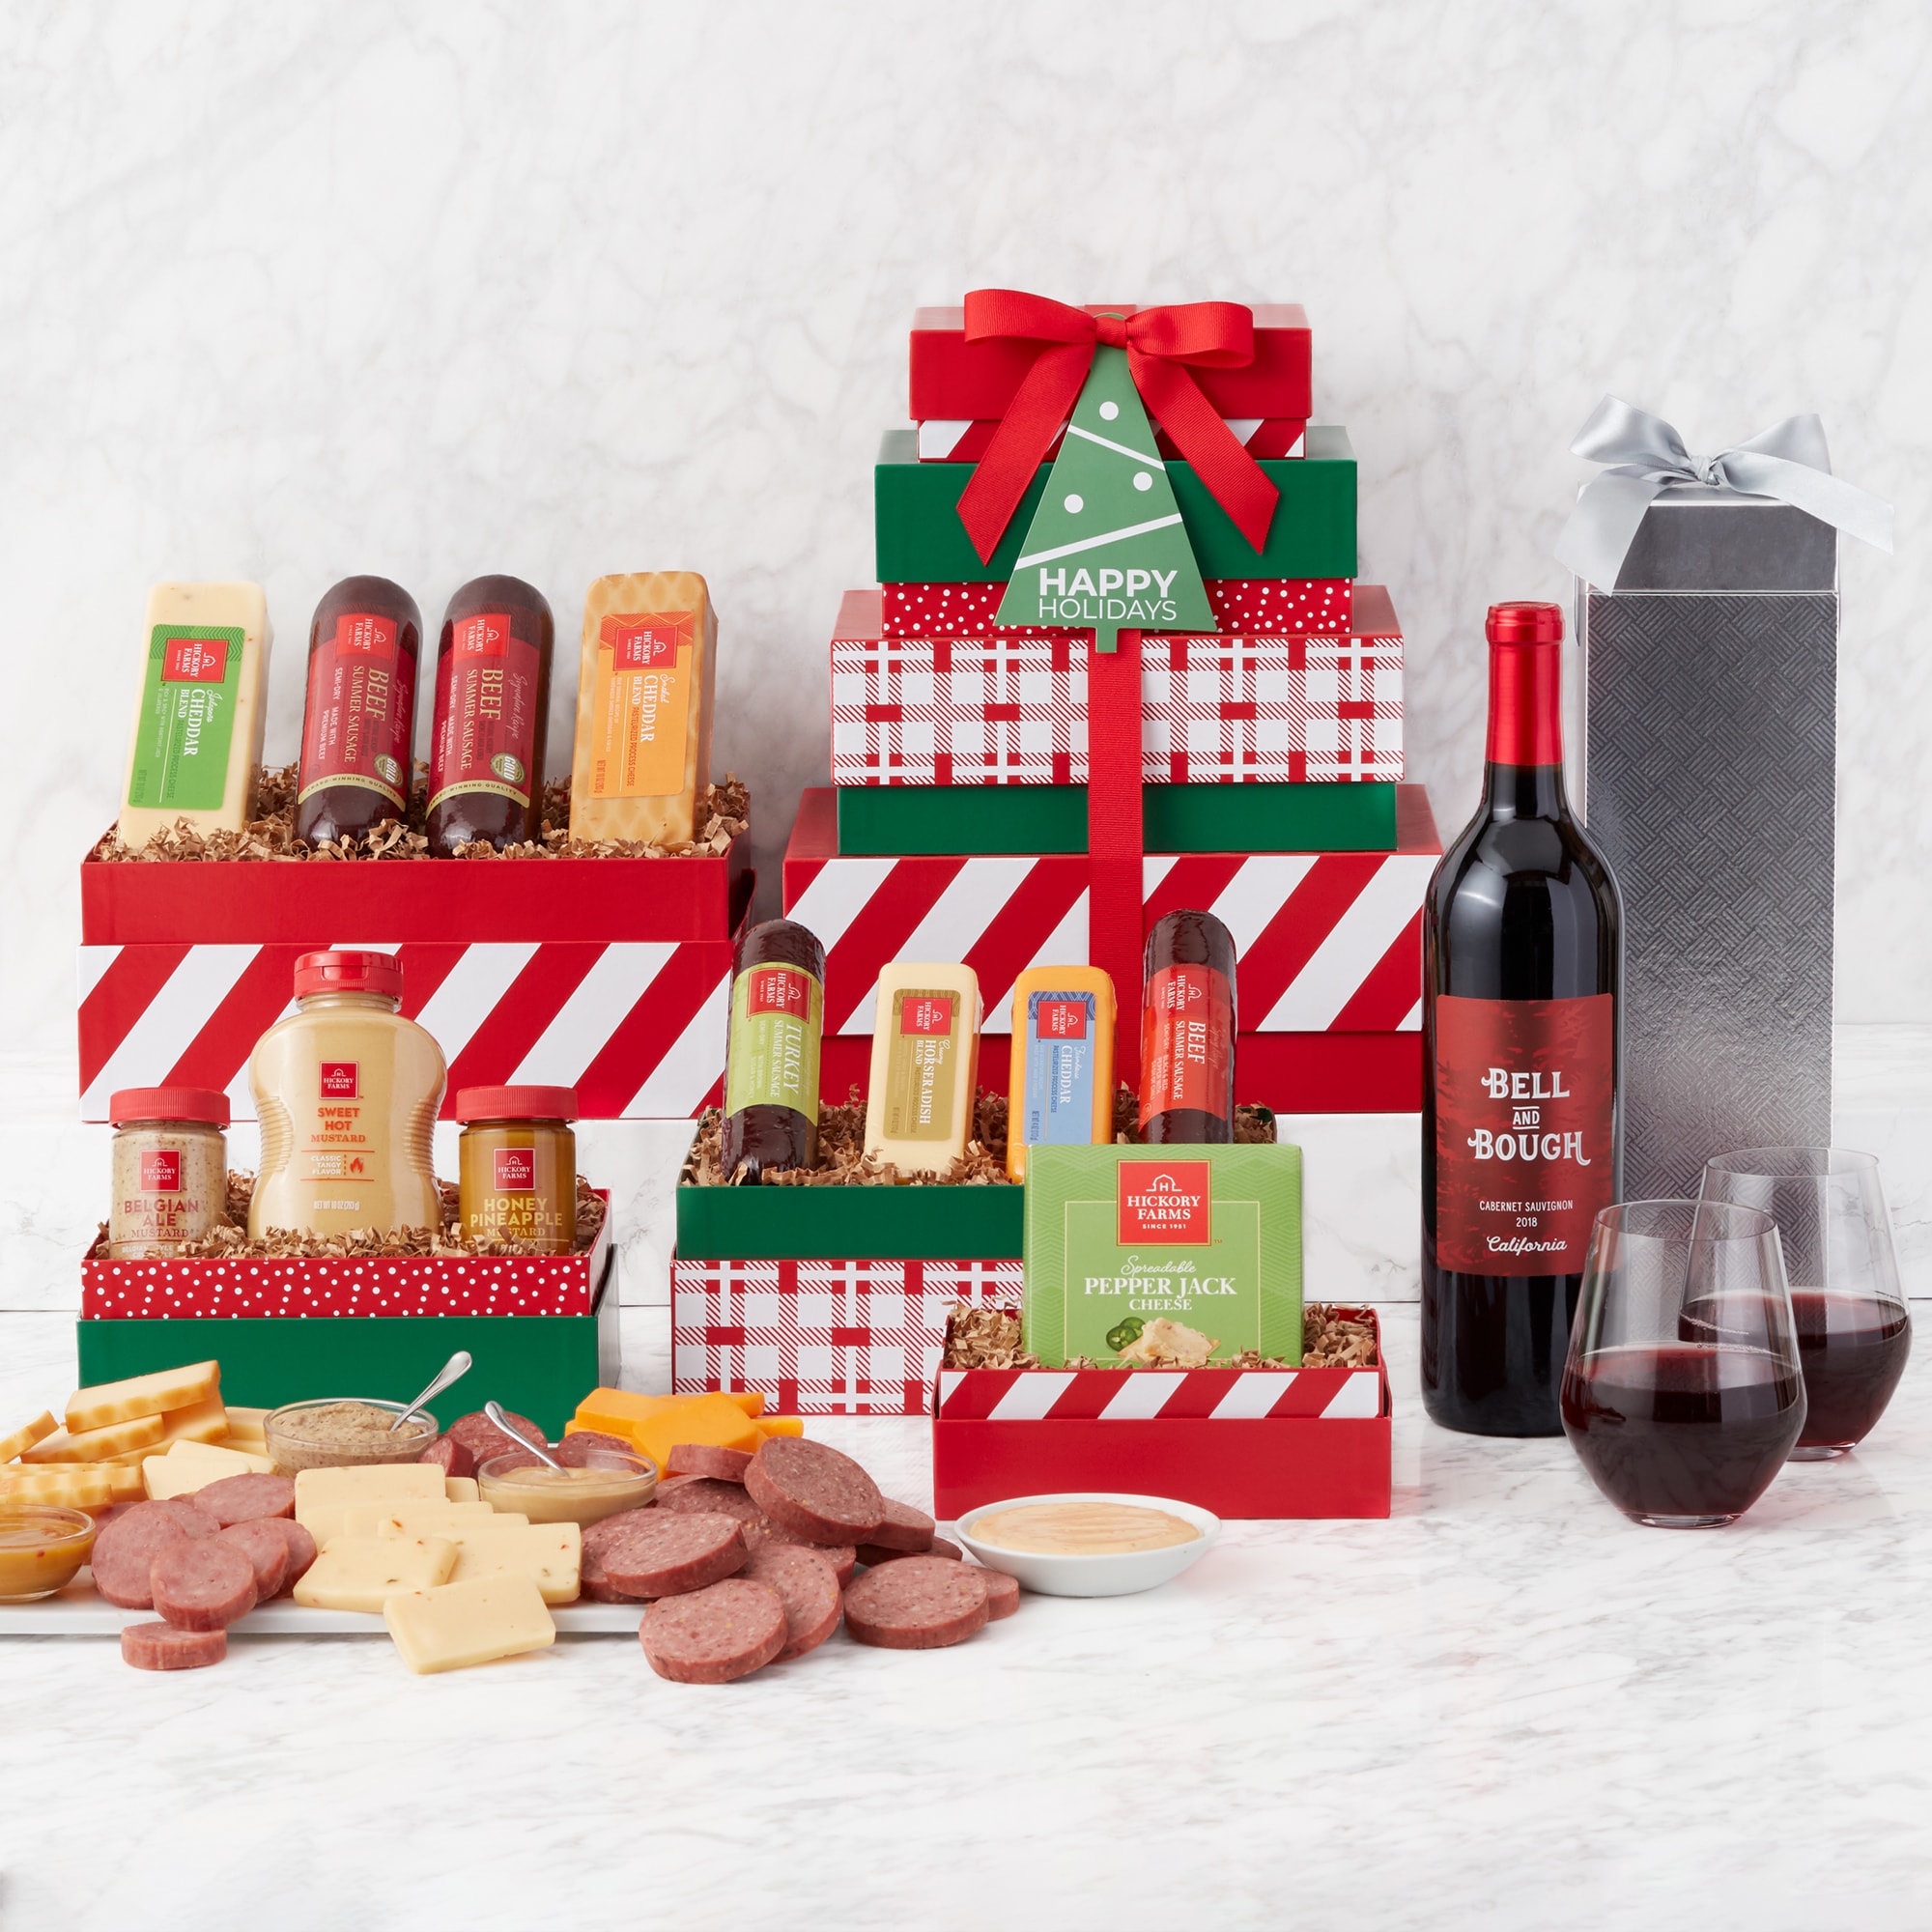 Father's Day Meat & Cheese Gift Tower with Wine